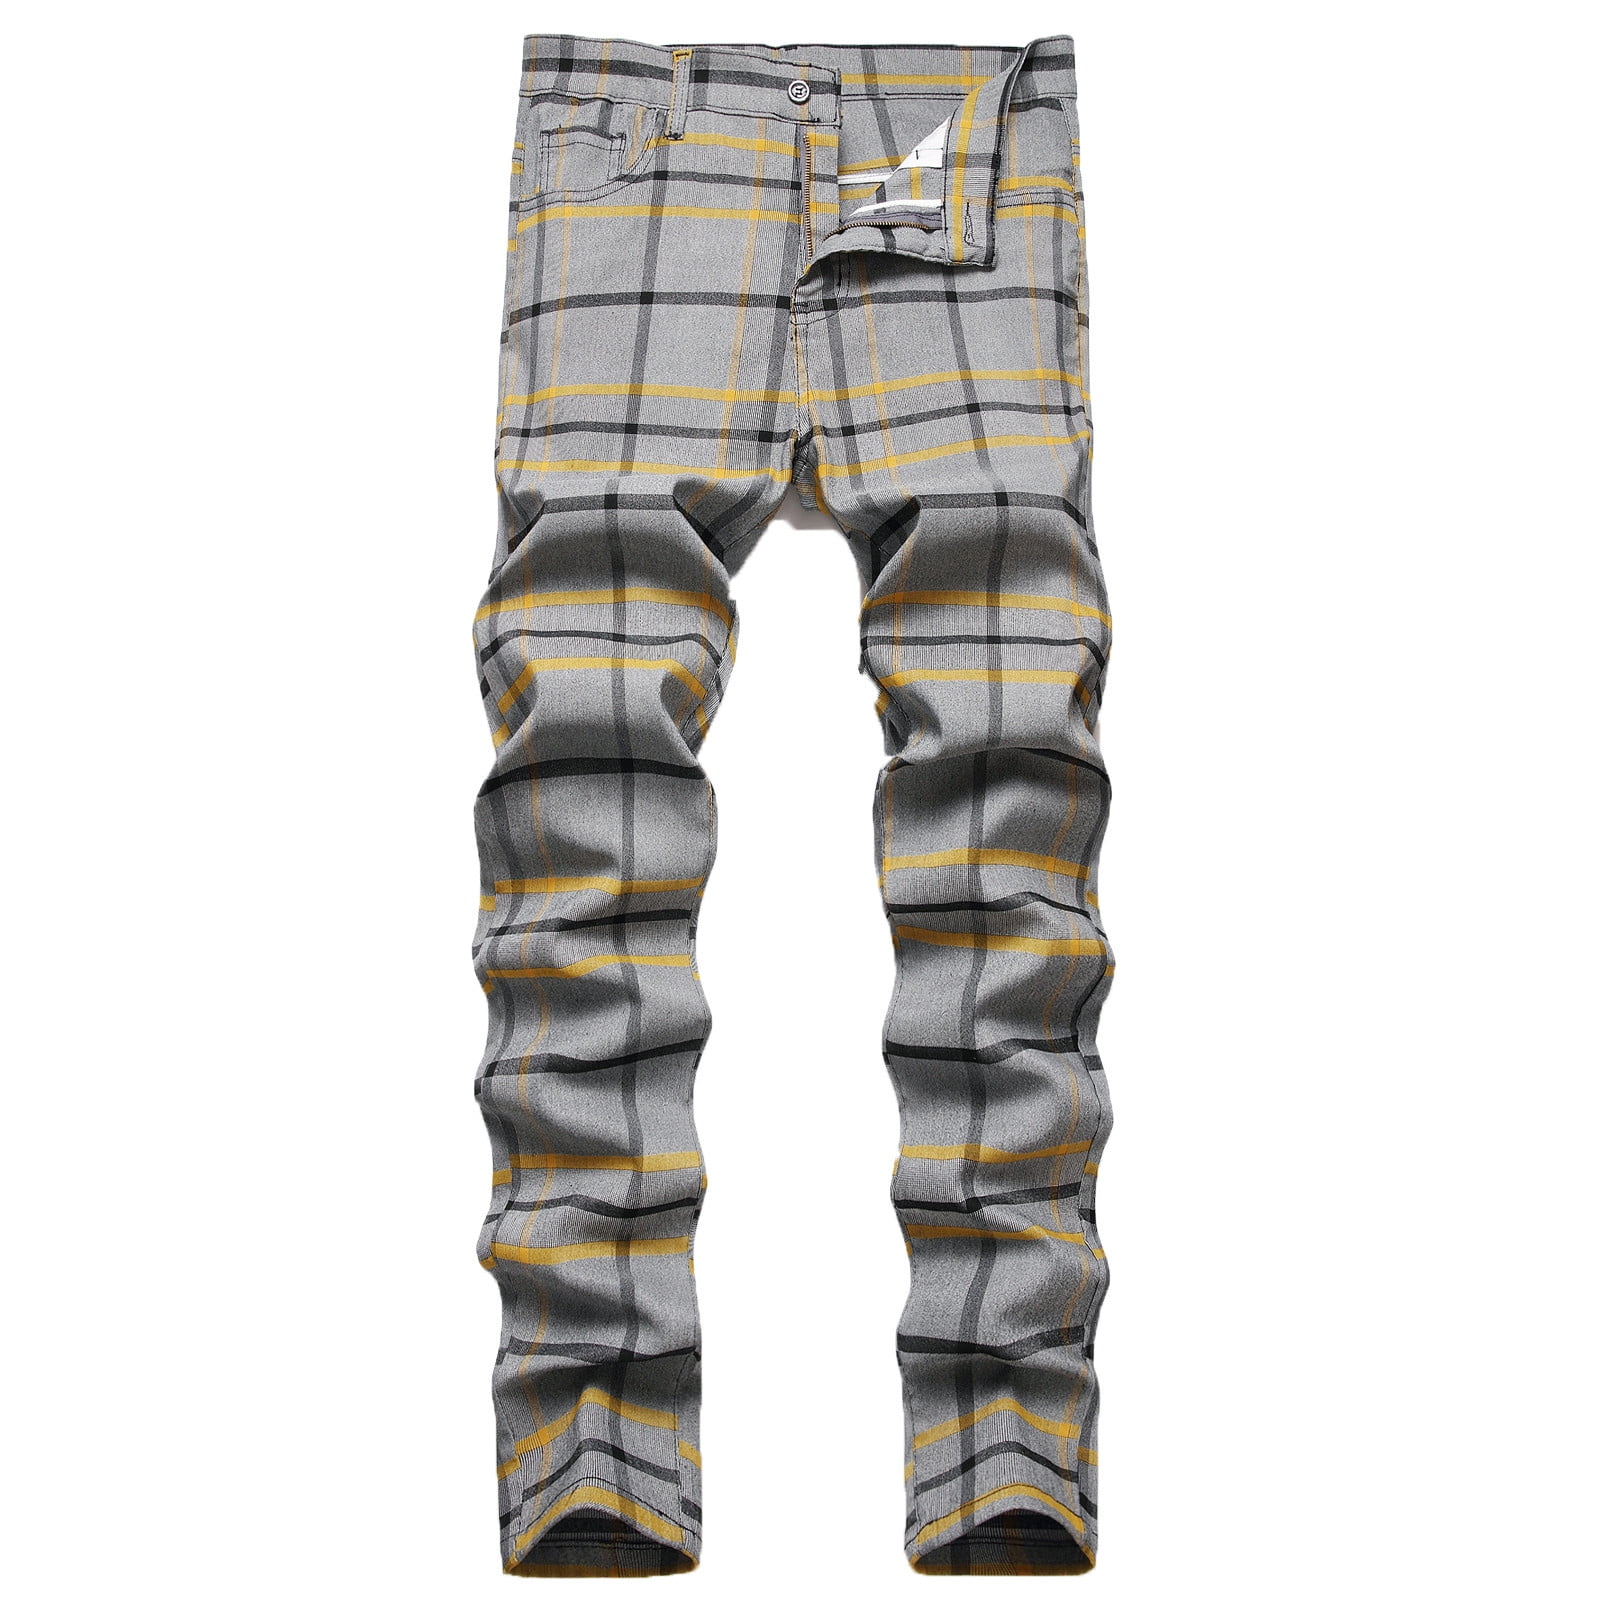 Mens Loose Long Pants V Print Creative Design Trendy Outdoor Casual Pants  With Drawstring And Pocket, Free Shipping For New Users